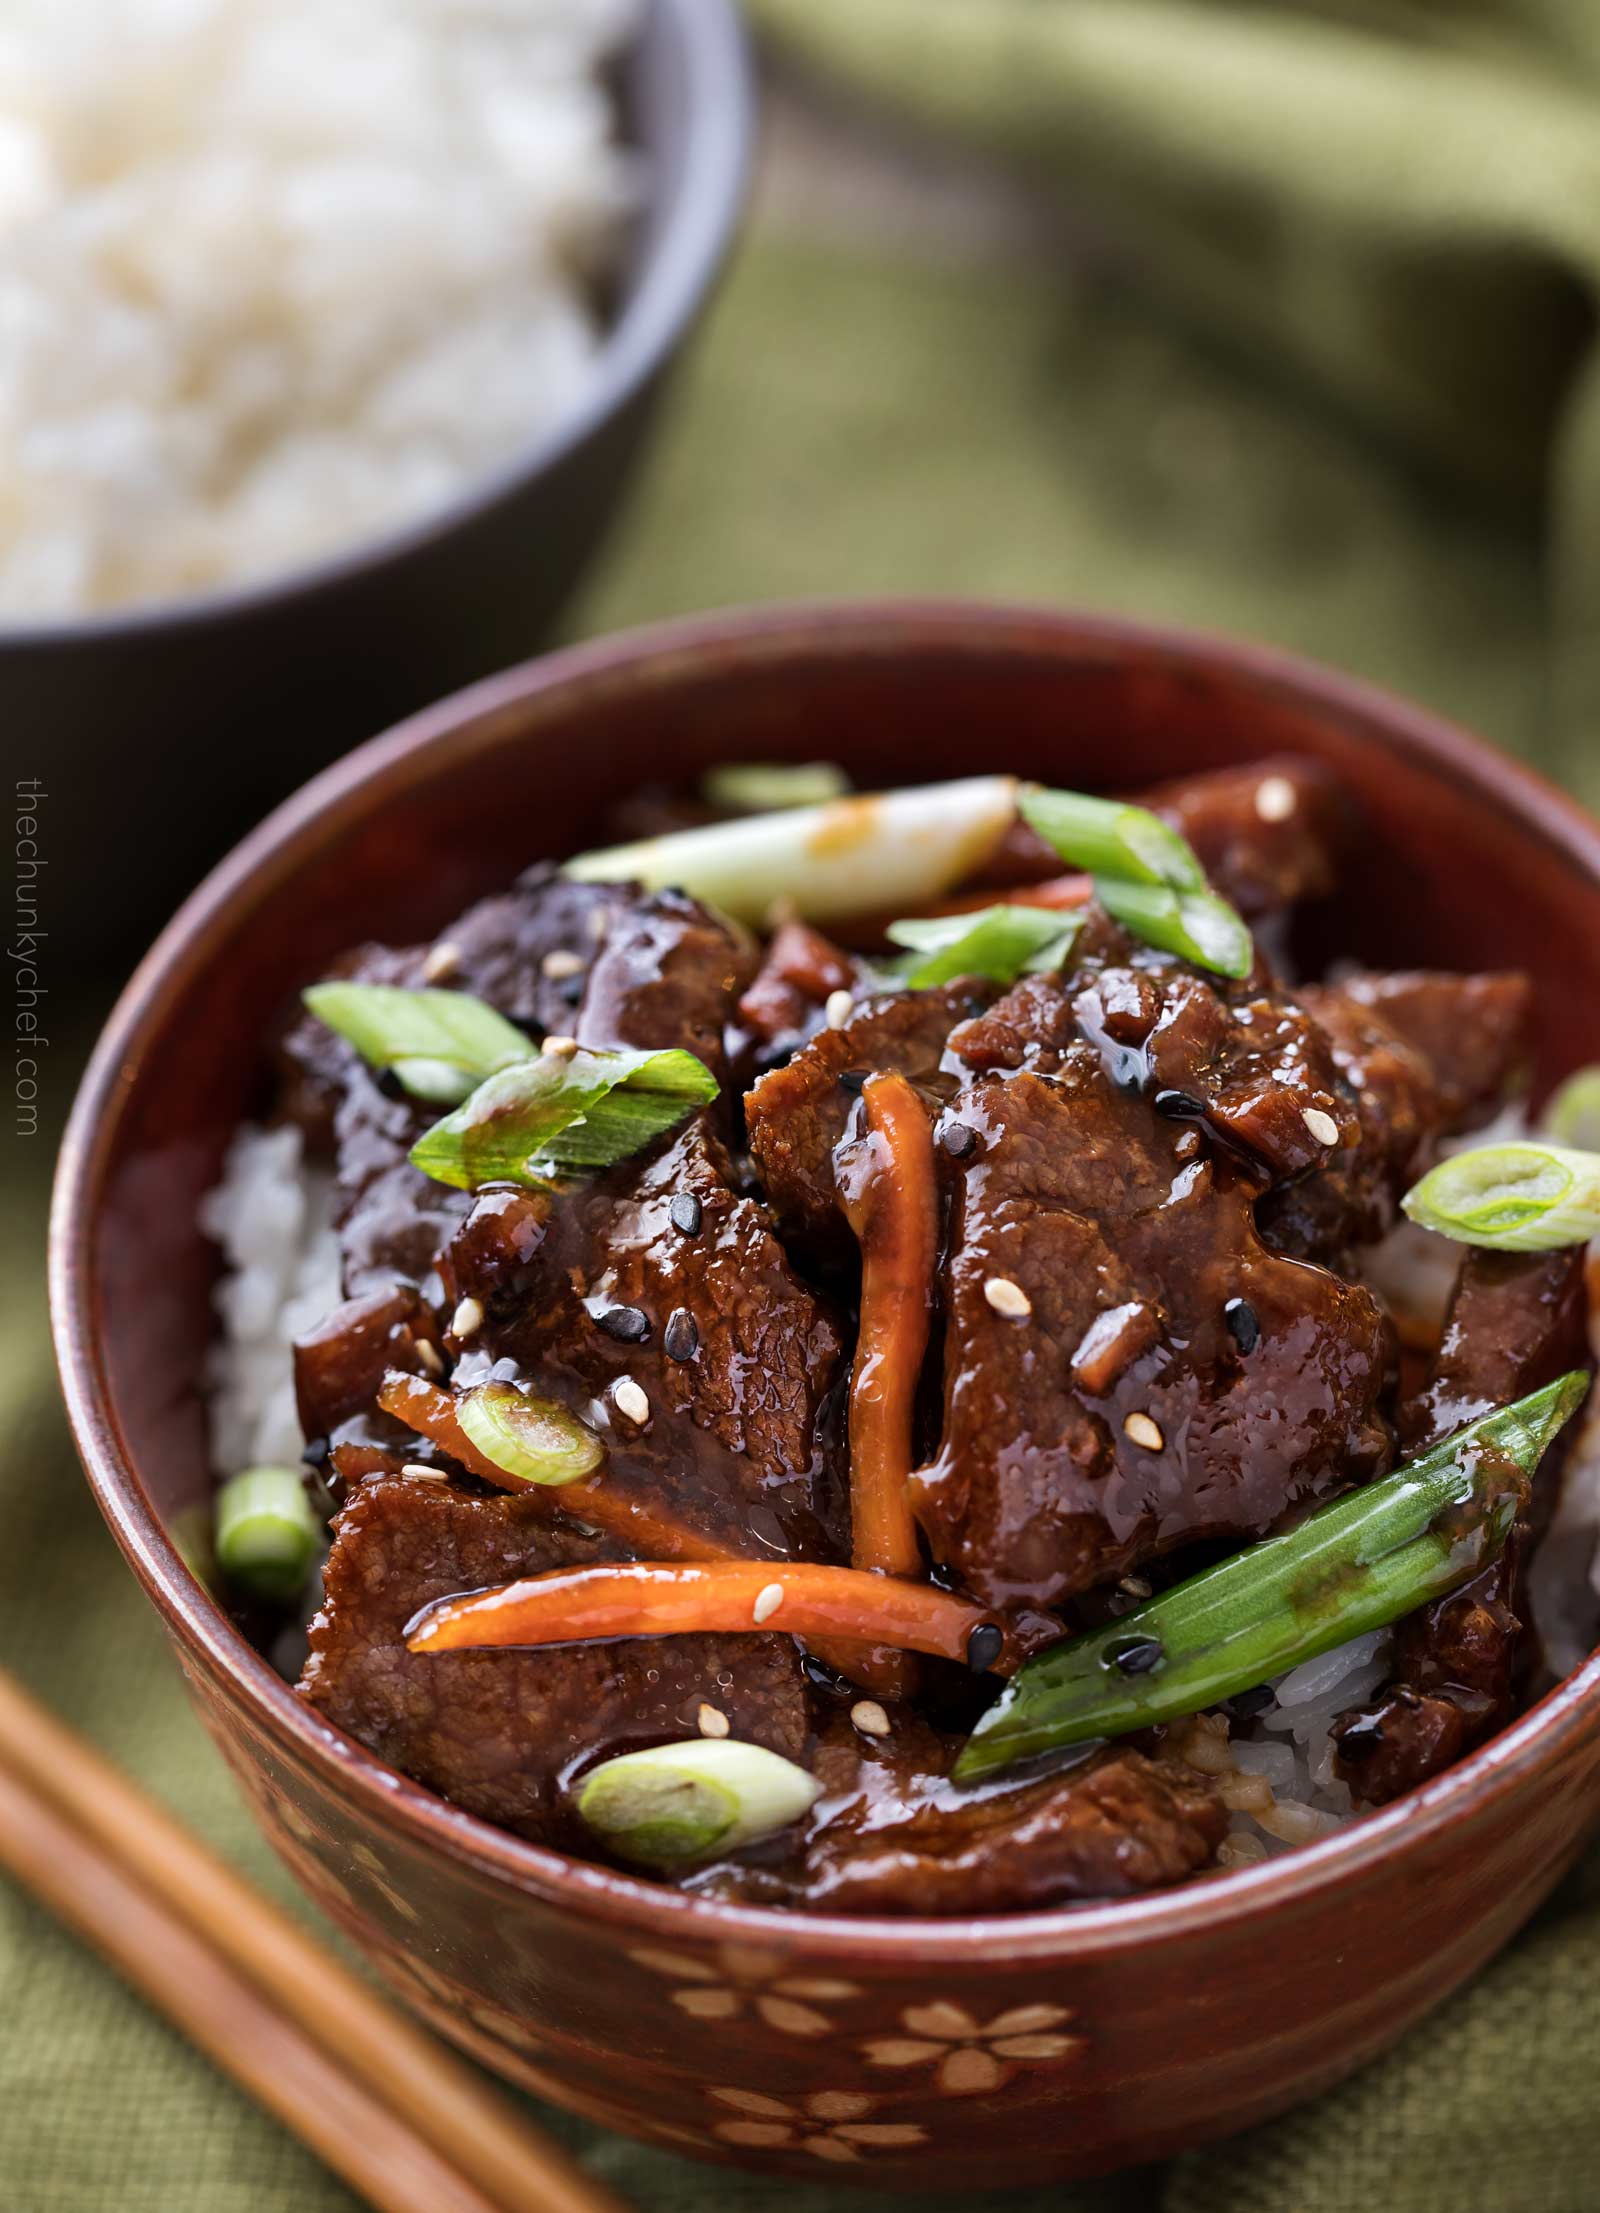 Easy Slow Cooker Mongolian Beef Recipe The Chunky Chef